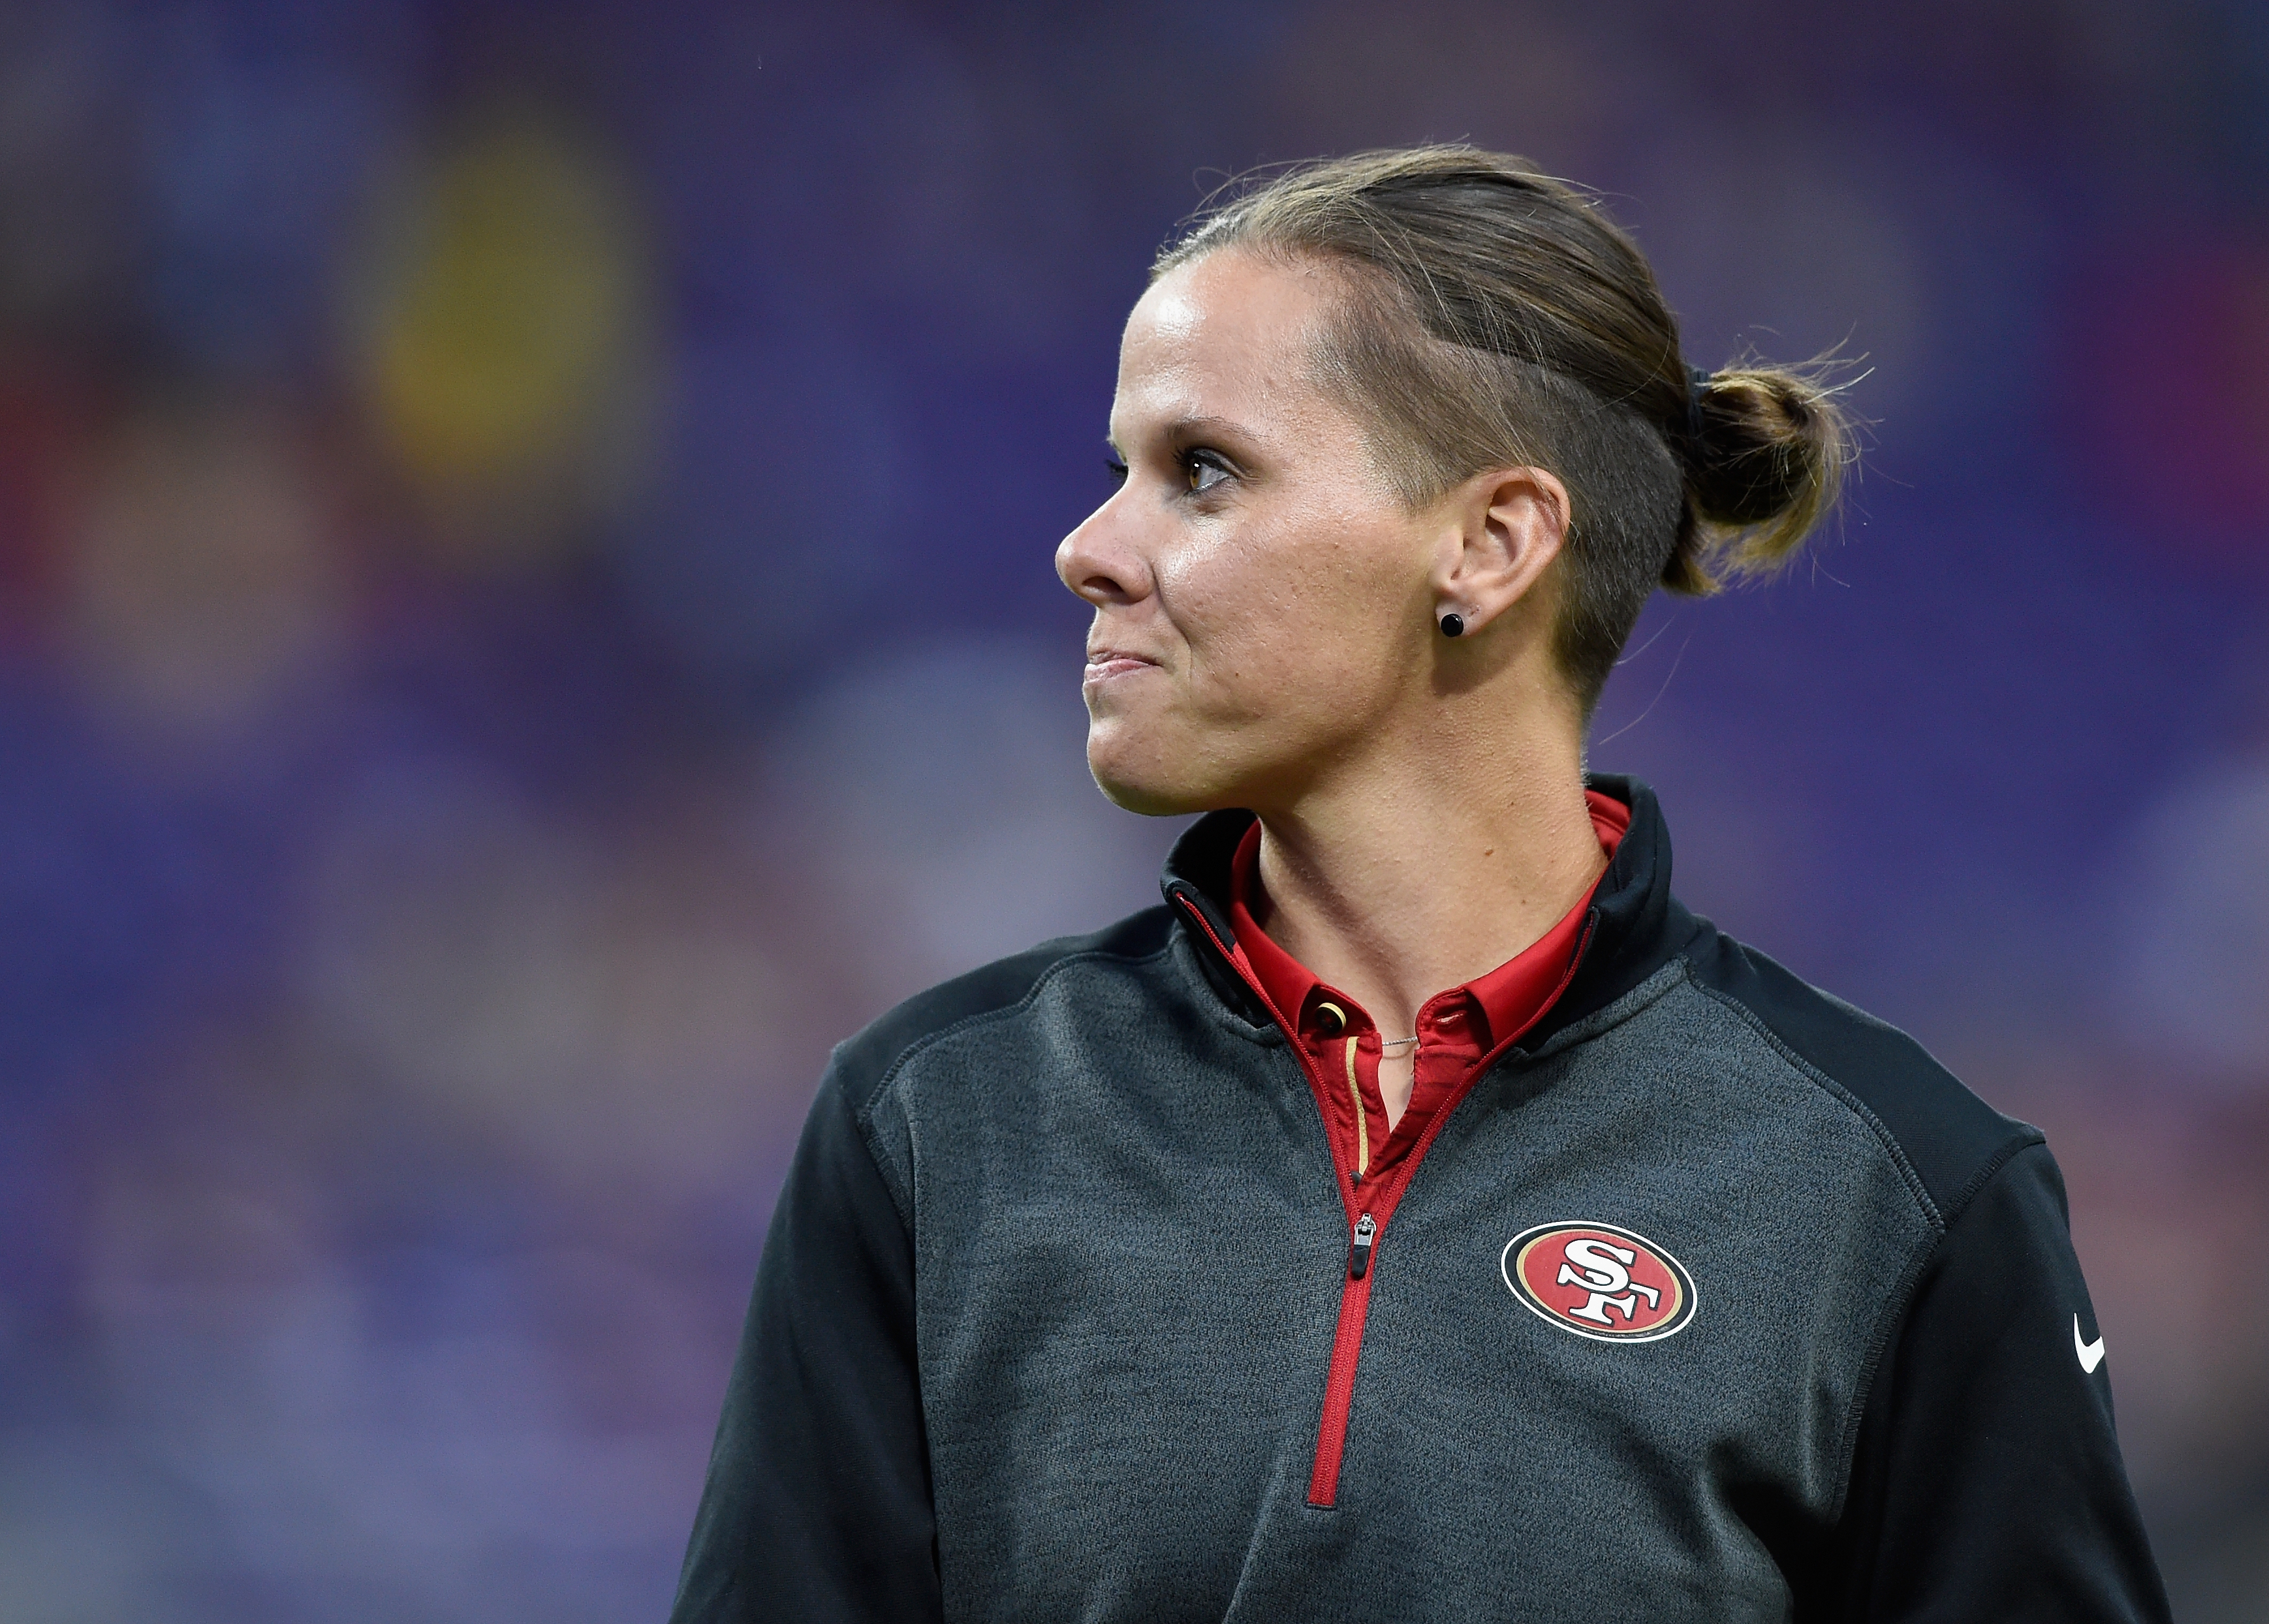 NFL's first female assistant coach to share her story, skills at